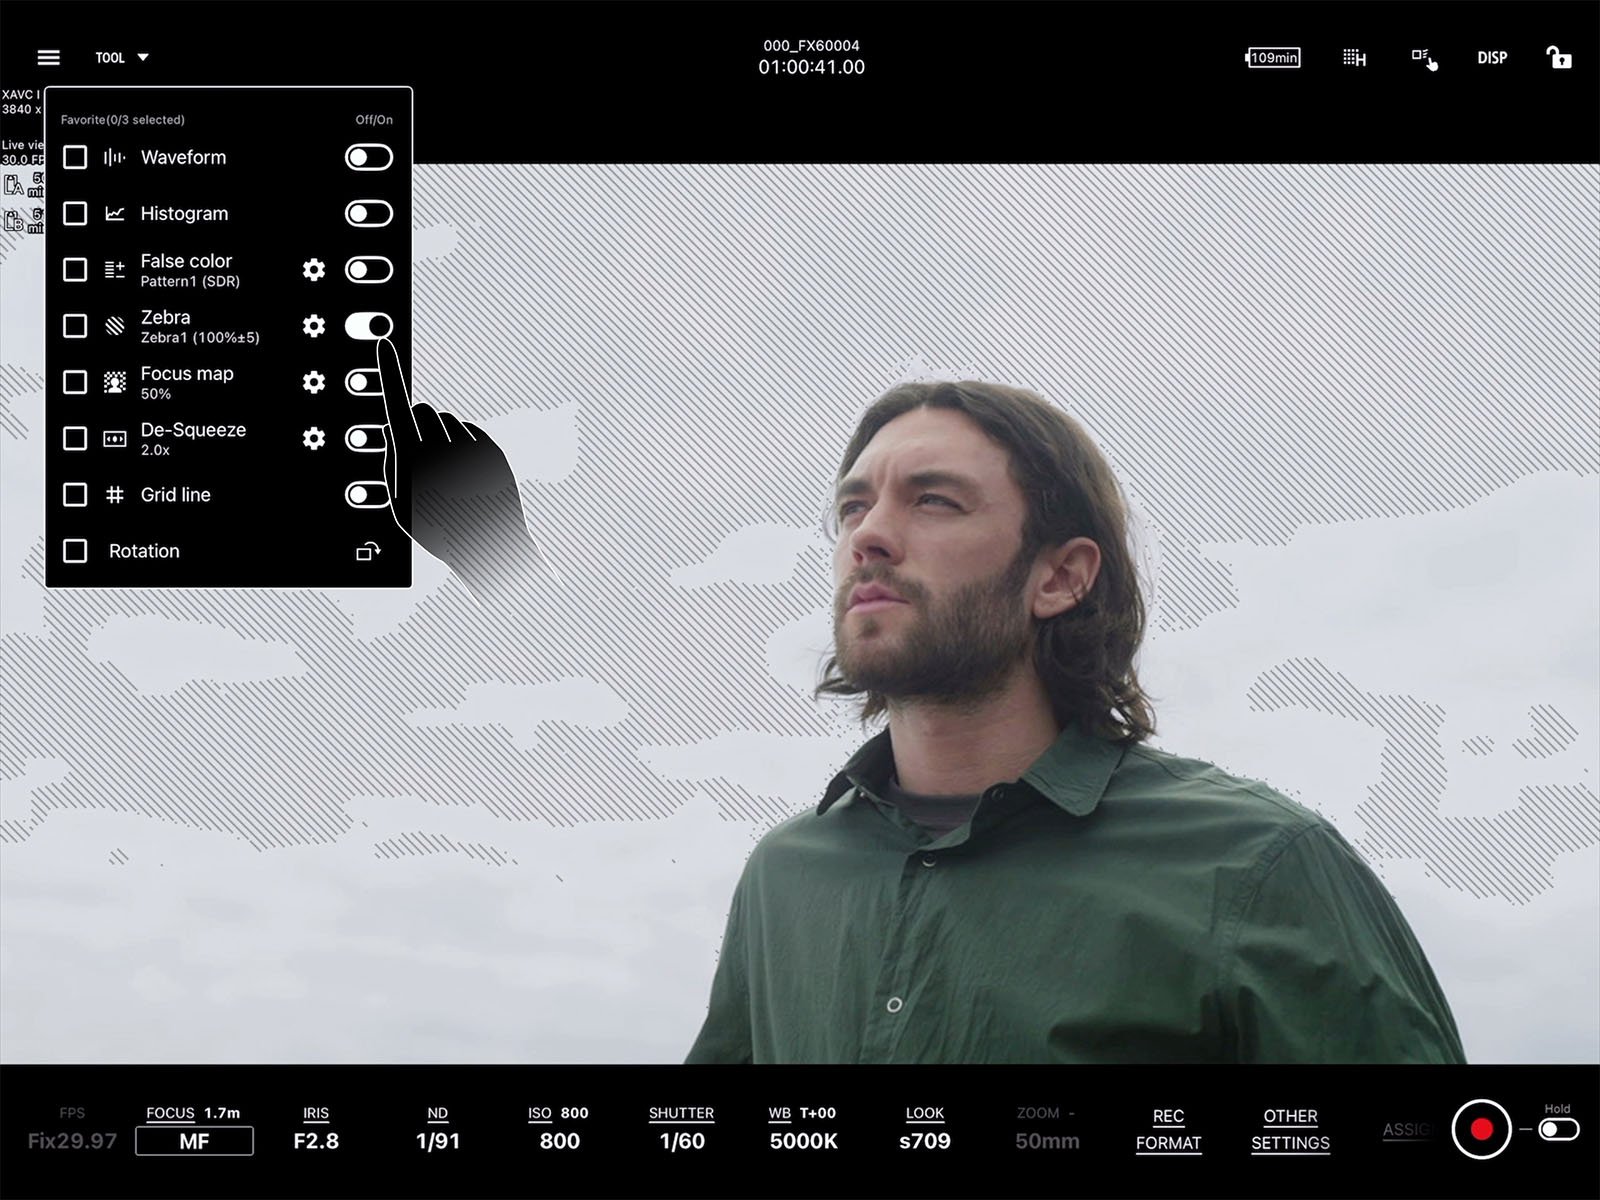 A man with long hair and a beard stands outdoors against a cloudy sky, wearing a green shirt. The image features a film or video camera interface overlay, showing settings such as focus, exposure, and various options for waveform, histogram, and grid.